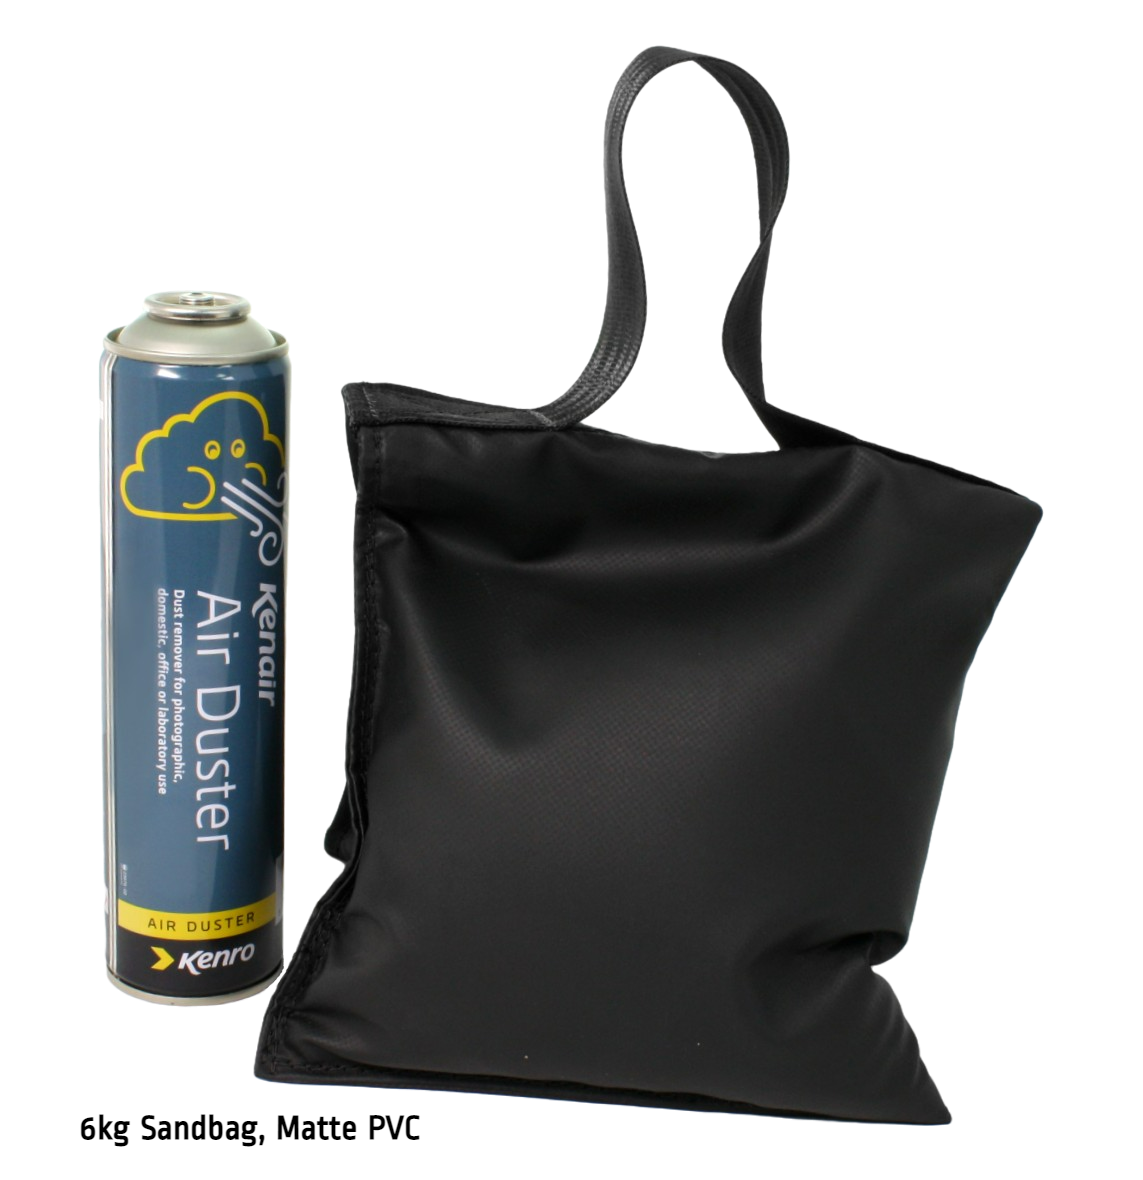 A 6kg sandbag in matte black PVC fabric, next to a can of Kenair for scale